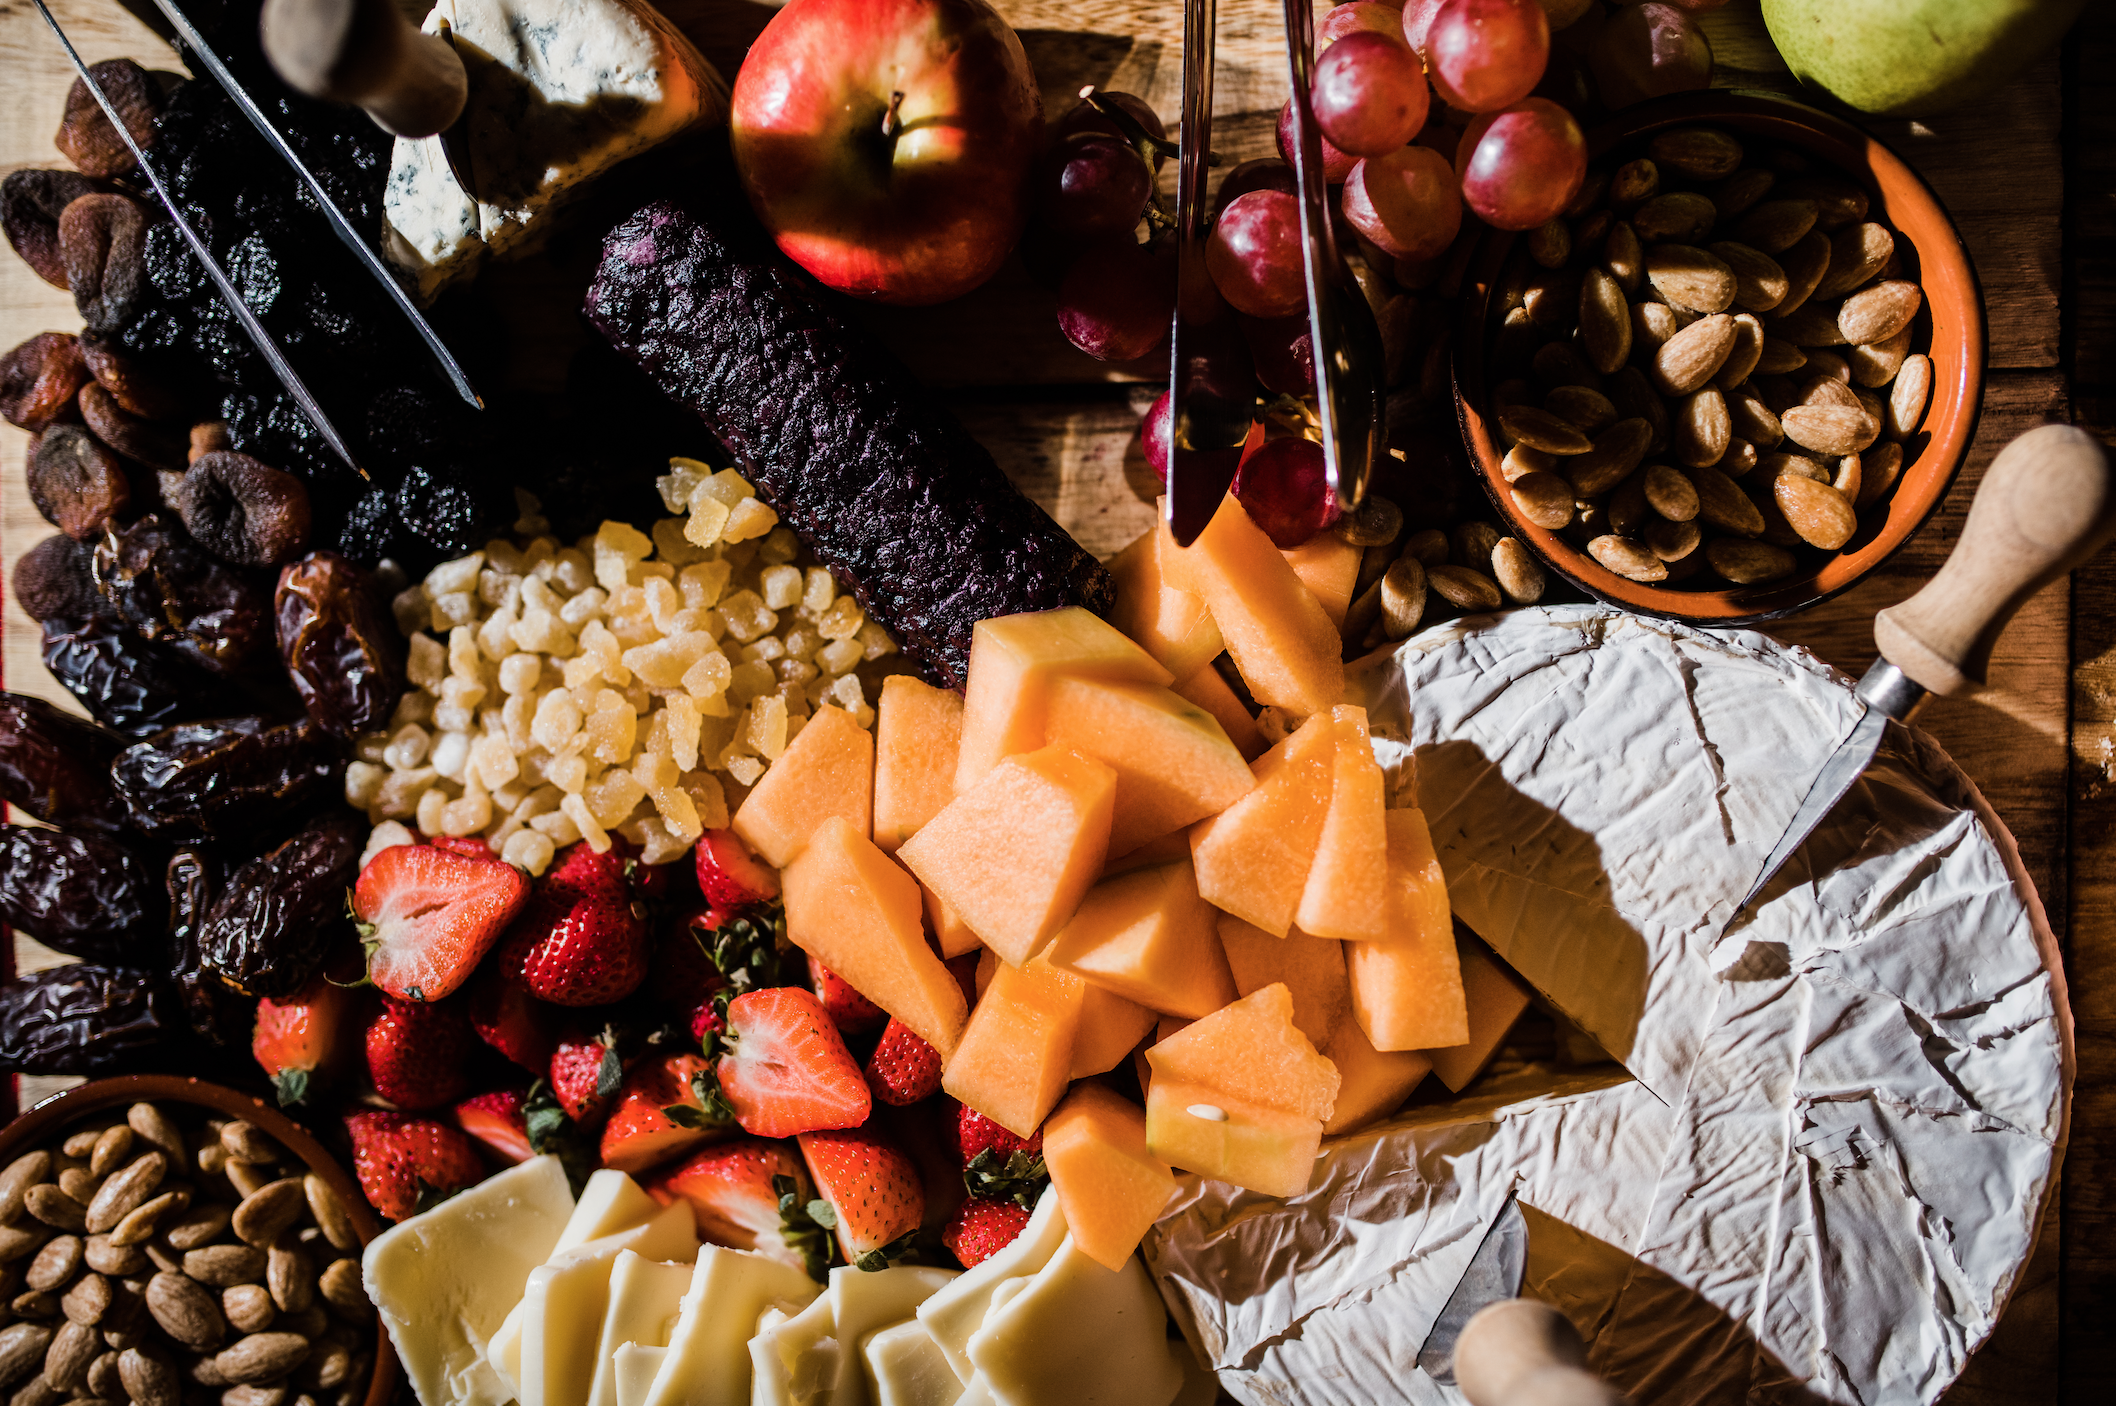 rustic cheese and charcuterie board with nuts, fresh and dried fruits for wedding appetizers